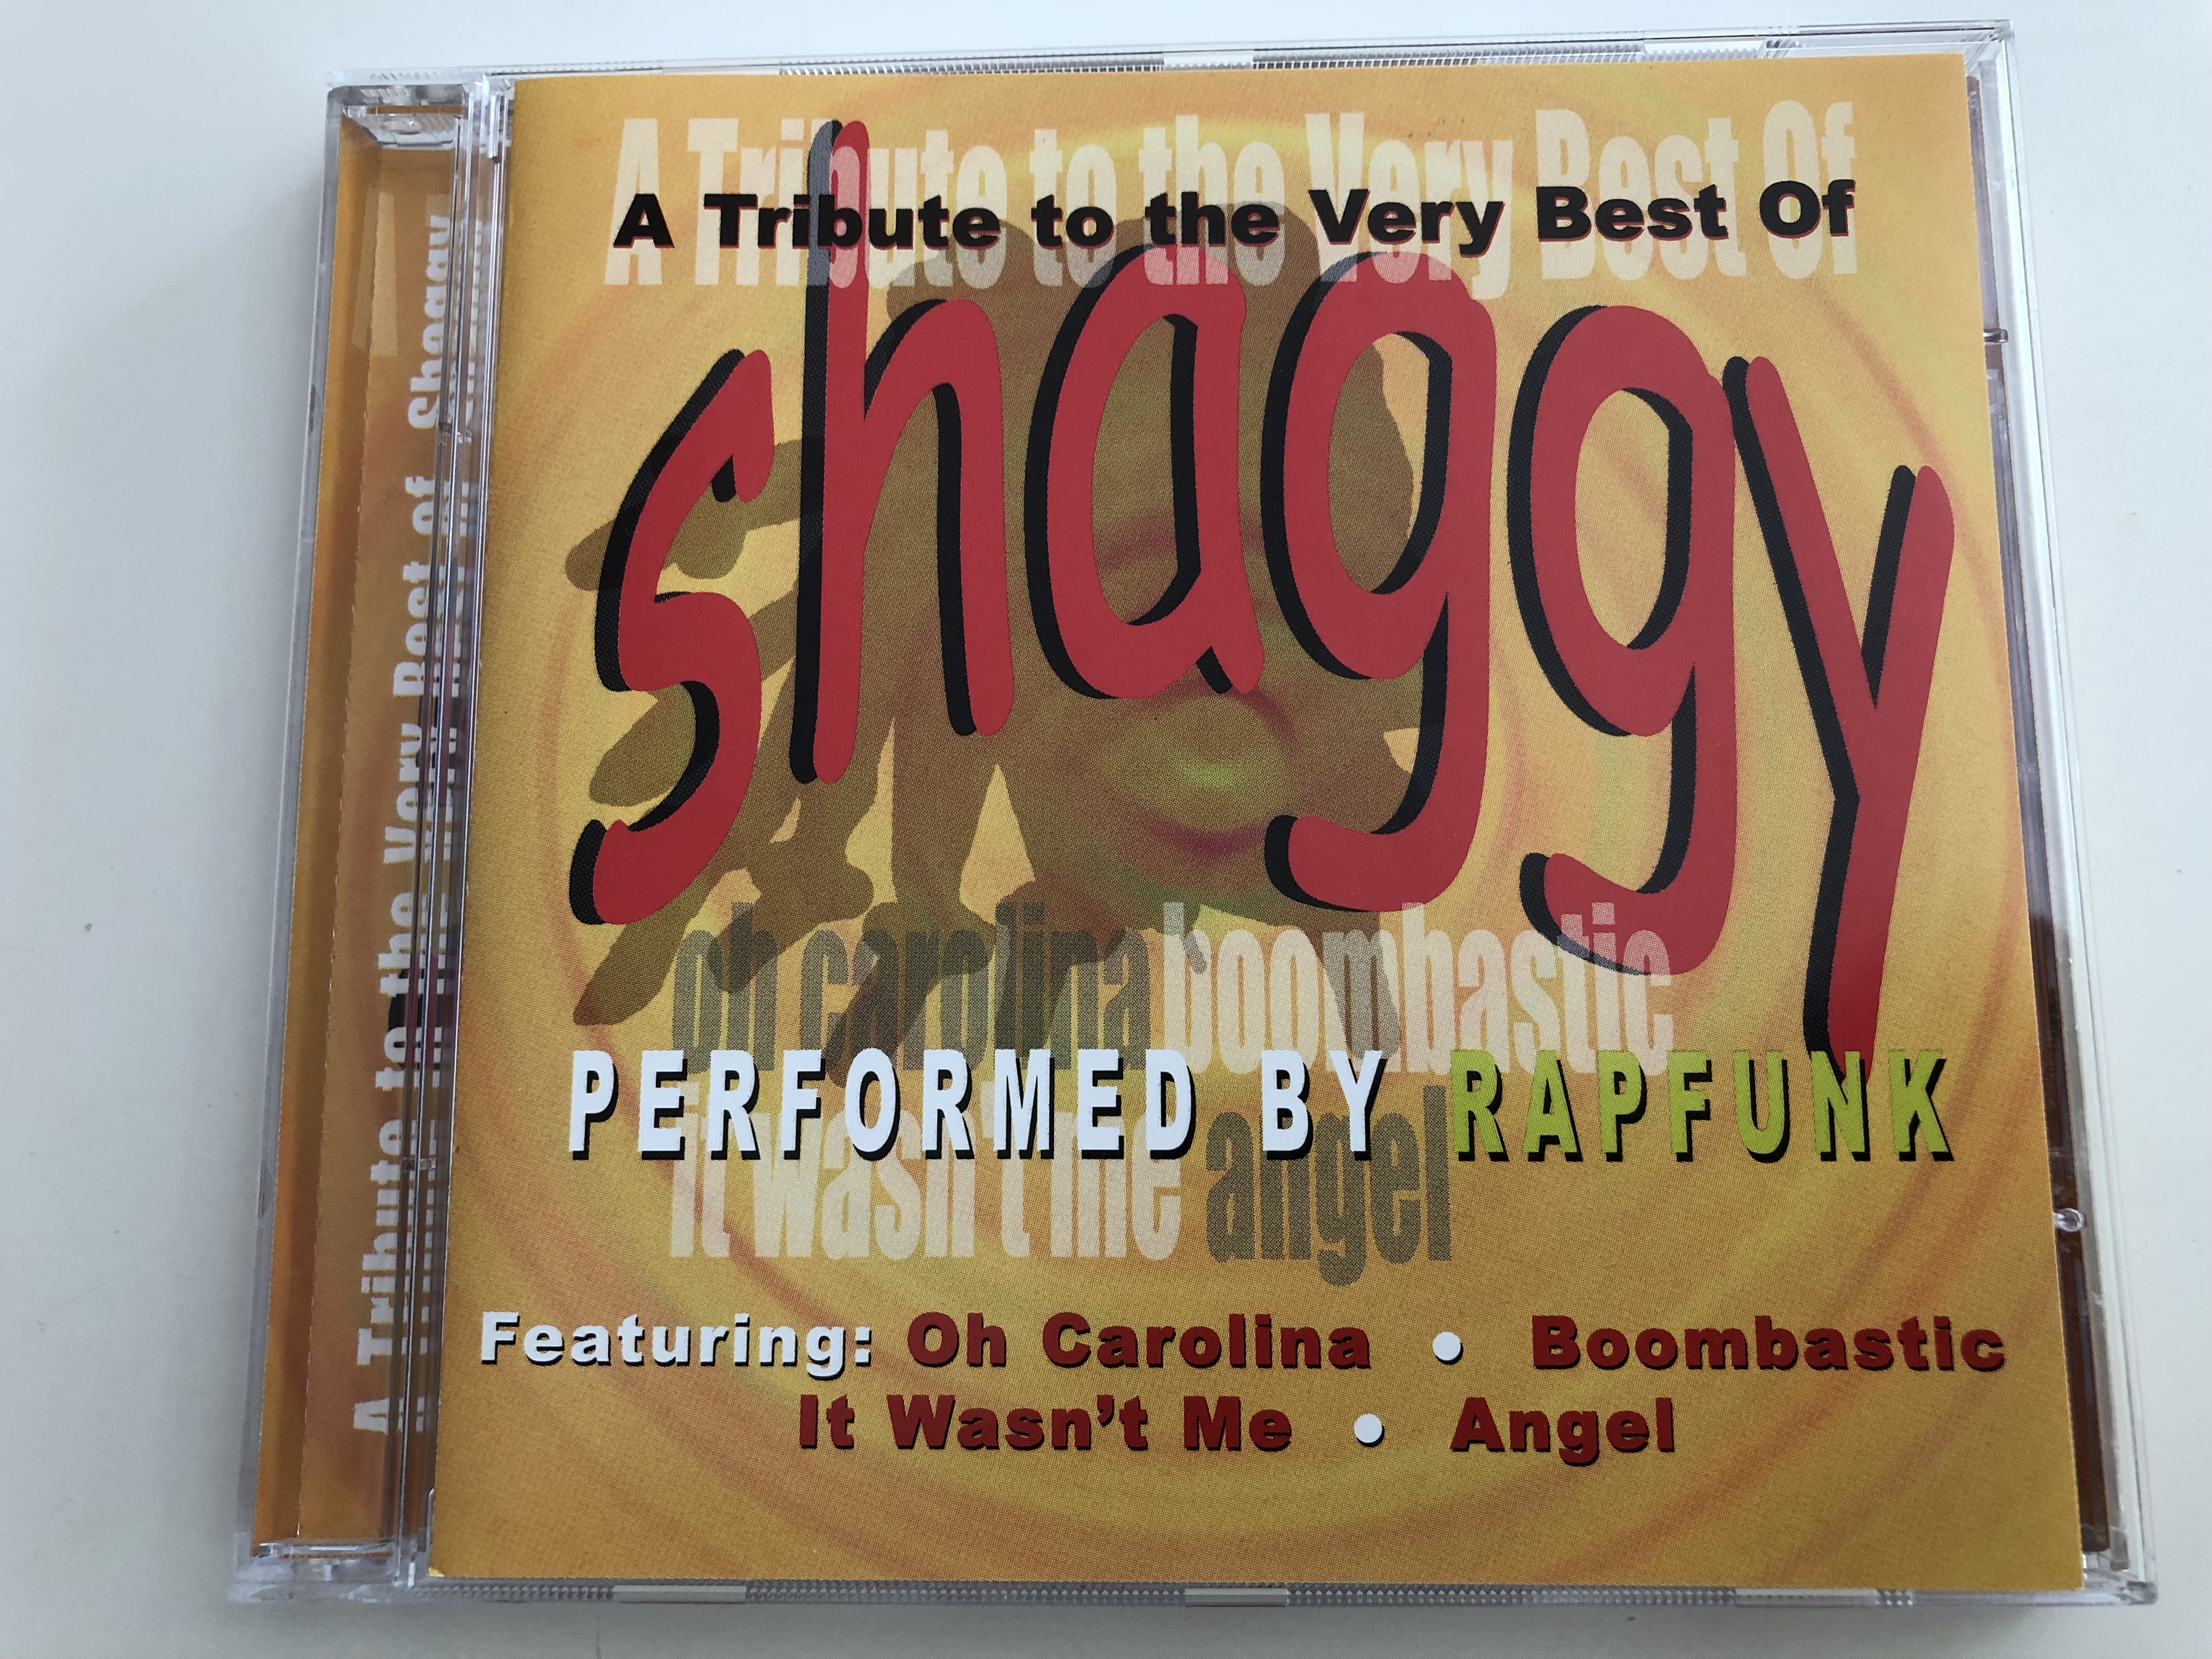 a-tribute-to-the-very-best-of-shaggy-performed-by-rapfunk-featuring-oh-carolina-boombastic-it-wasn-t-me-angel-audio-cd-2001-sp087-2-1-.jpg